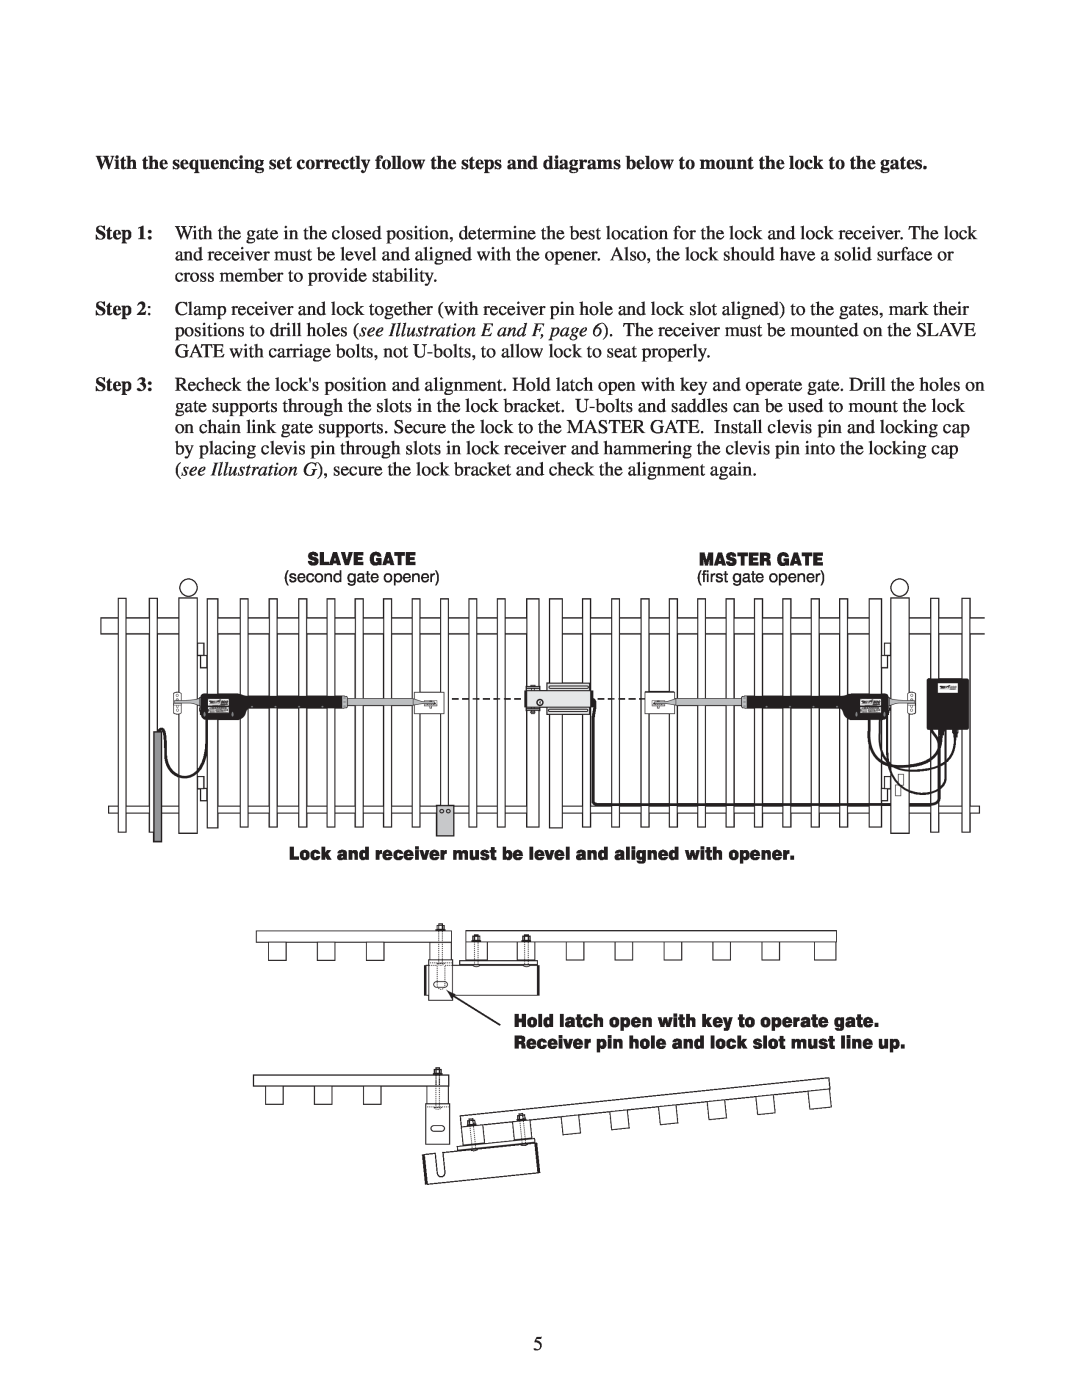 GTO RB909 installation manual Lock and receiver must be level and aligned with opener, Slave Gate, Master Gate 